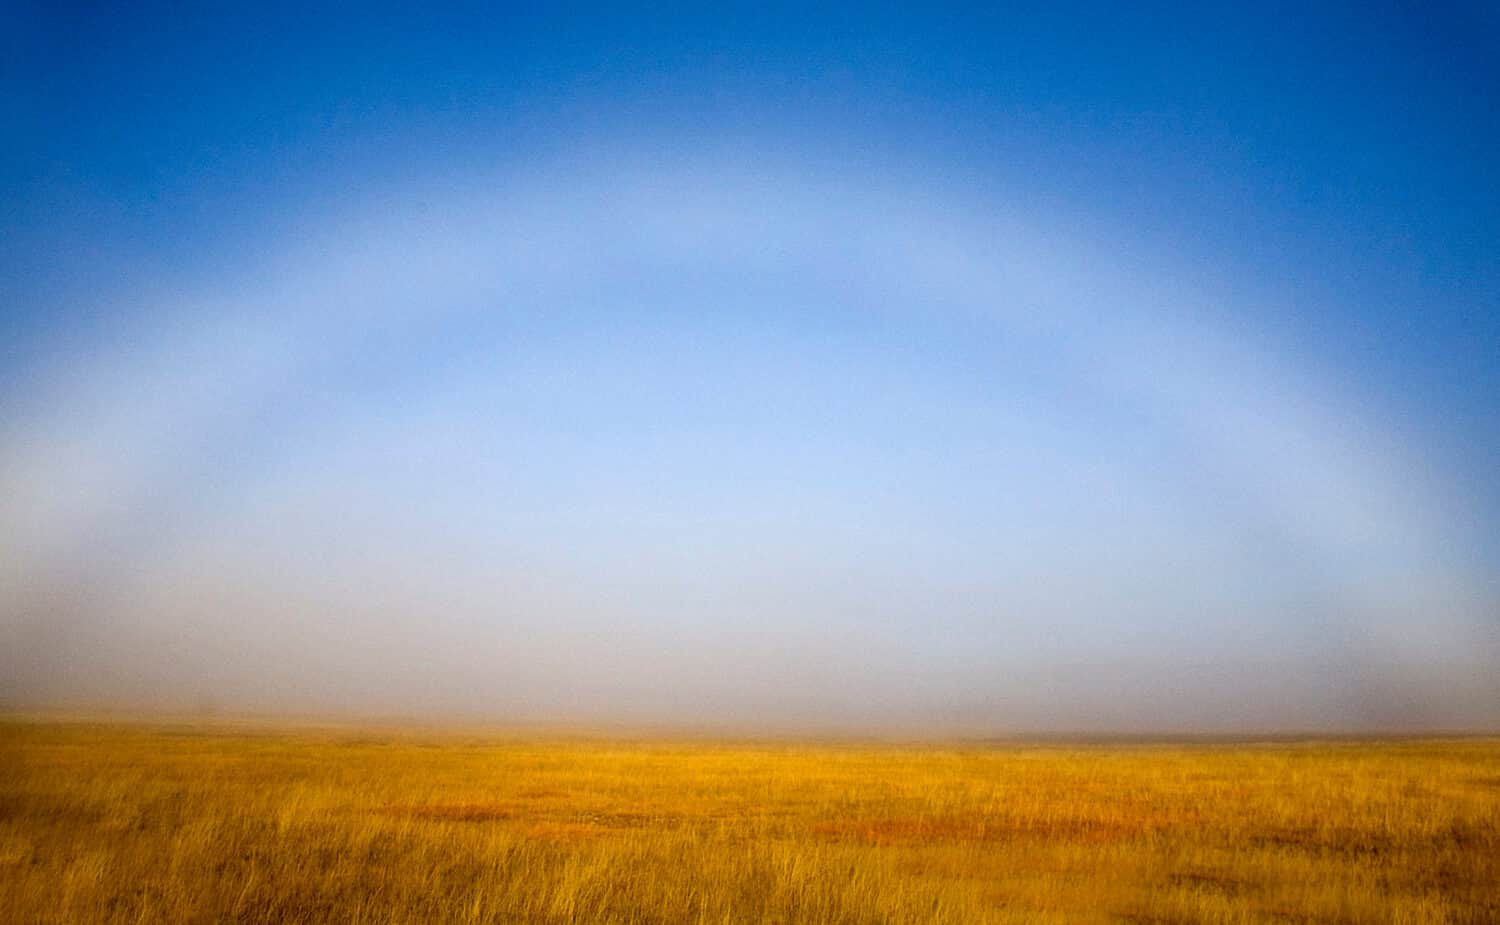 LOW LYING FOG FORM A BOW, ALSO KNOWN AS A FOGBOW, IN YELLOWSTONE NATIONAL PARK,WYOMING